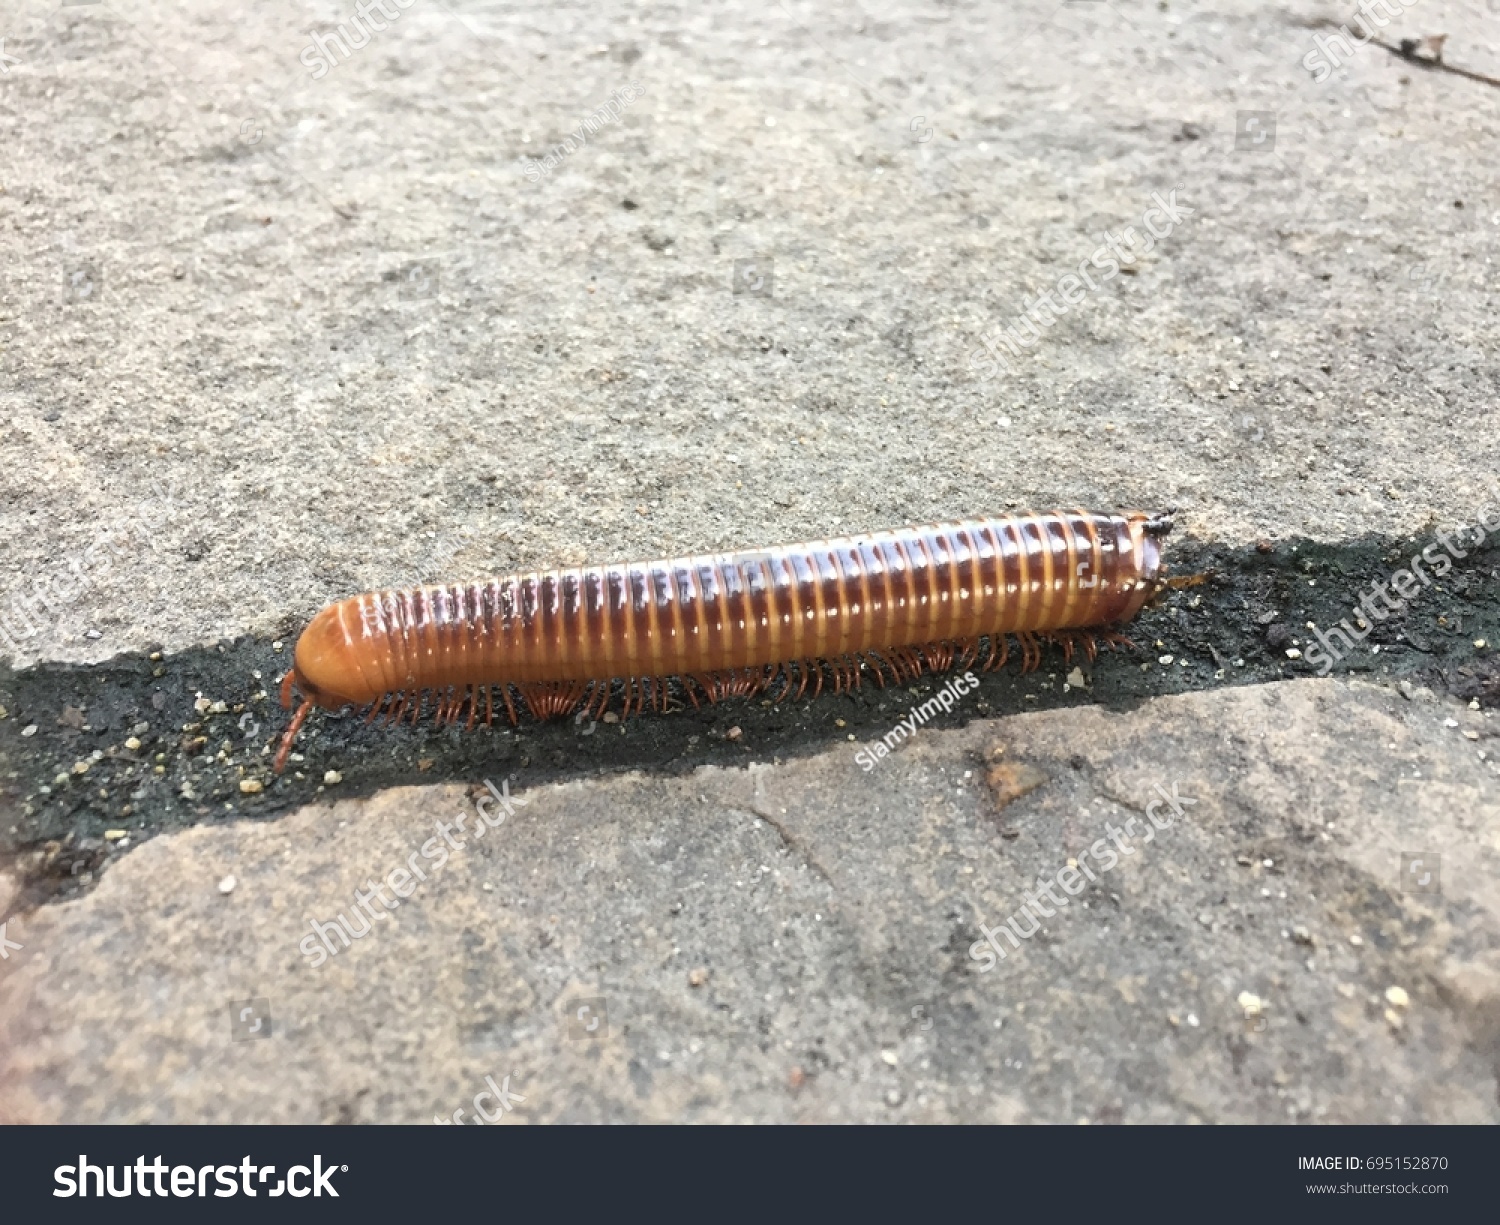 Millipedes are a group of arthropods that are characterised by having two pairs of jointed legs on most body segments; they are known scientifically as the class Diplopoda. #695152870